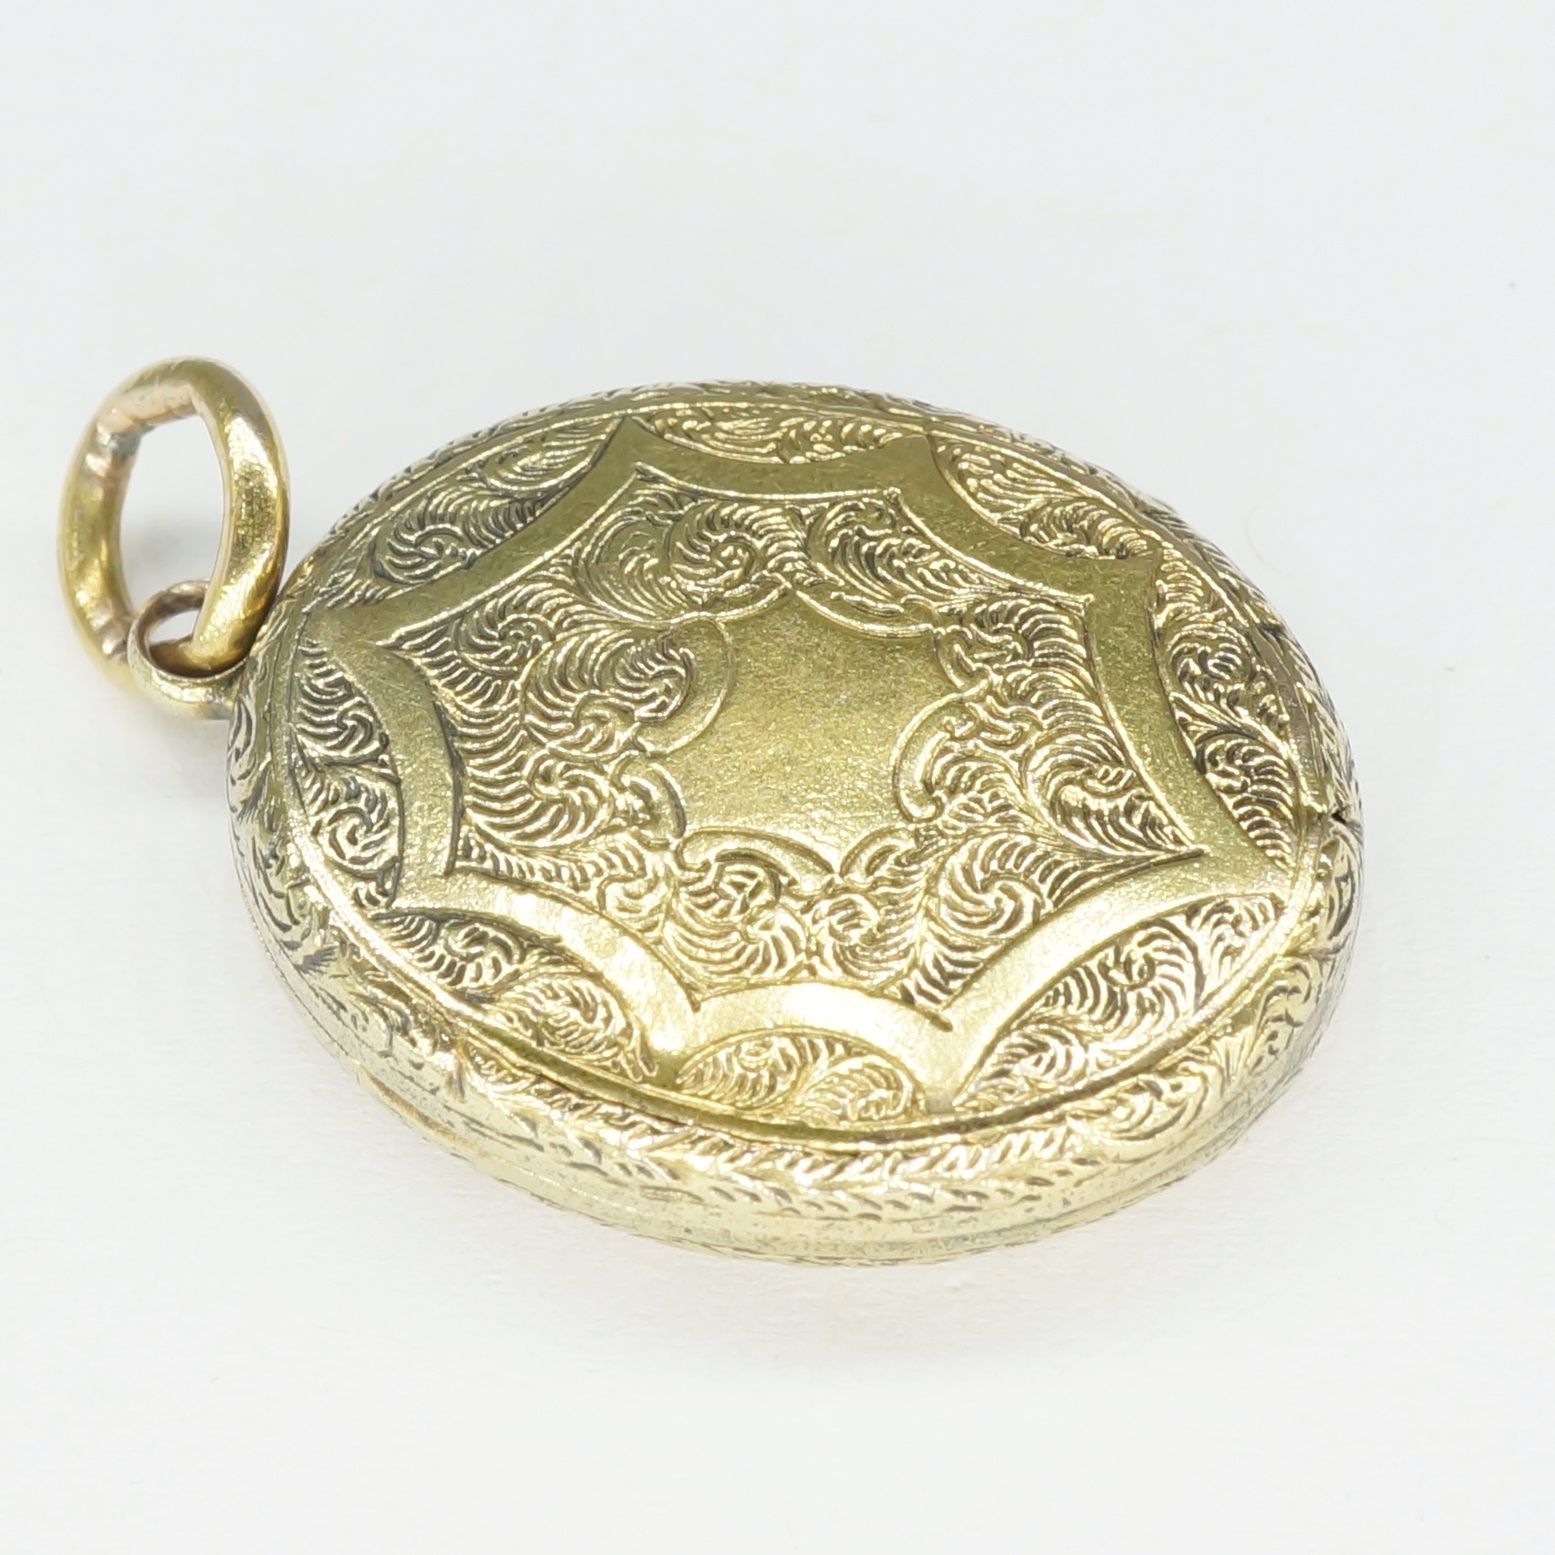 '15ct Yellow Gold Engraved Locket with Painted Portrait Inside'